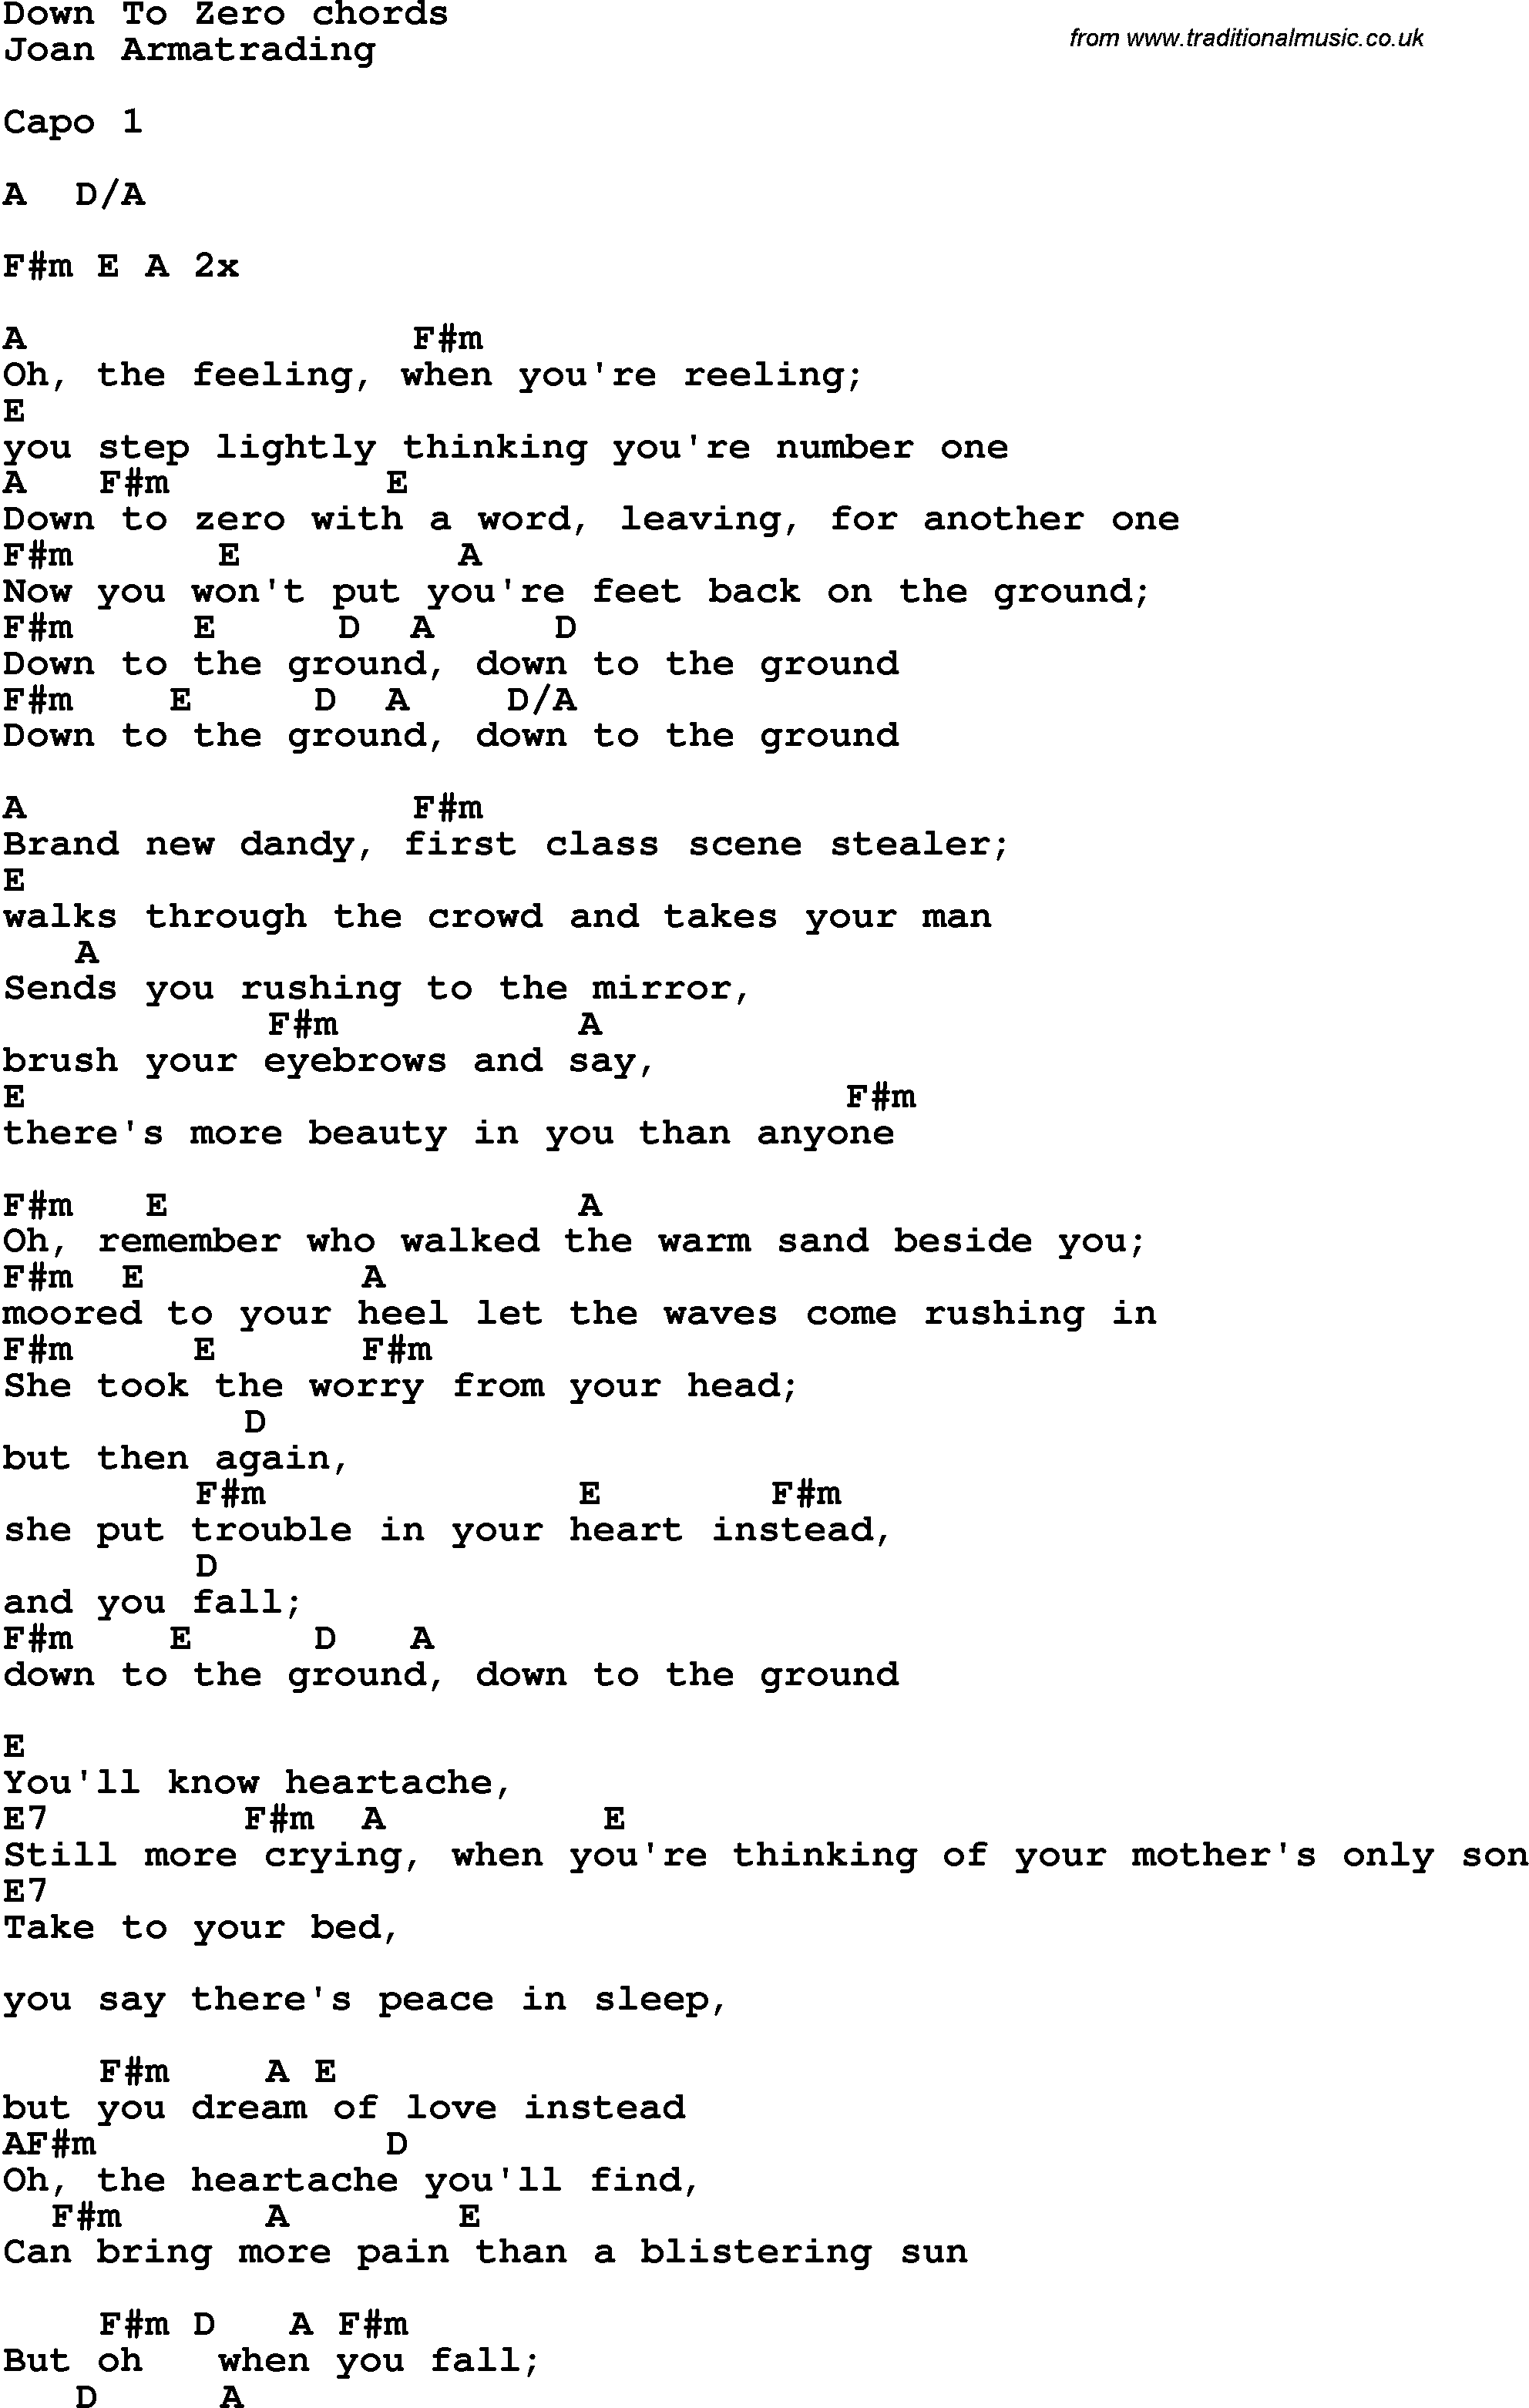 Song Lyrics with guitar chords for Down To Zero